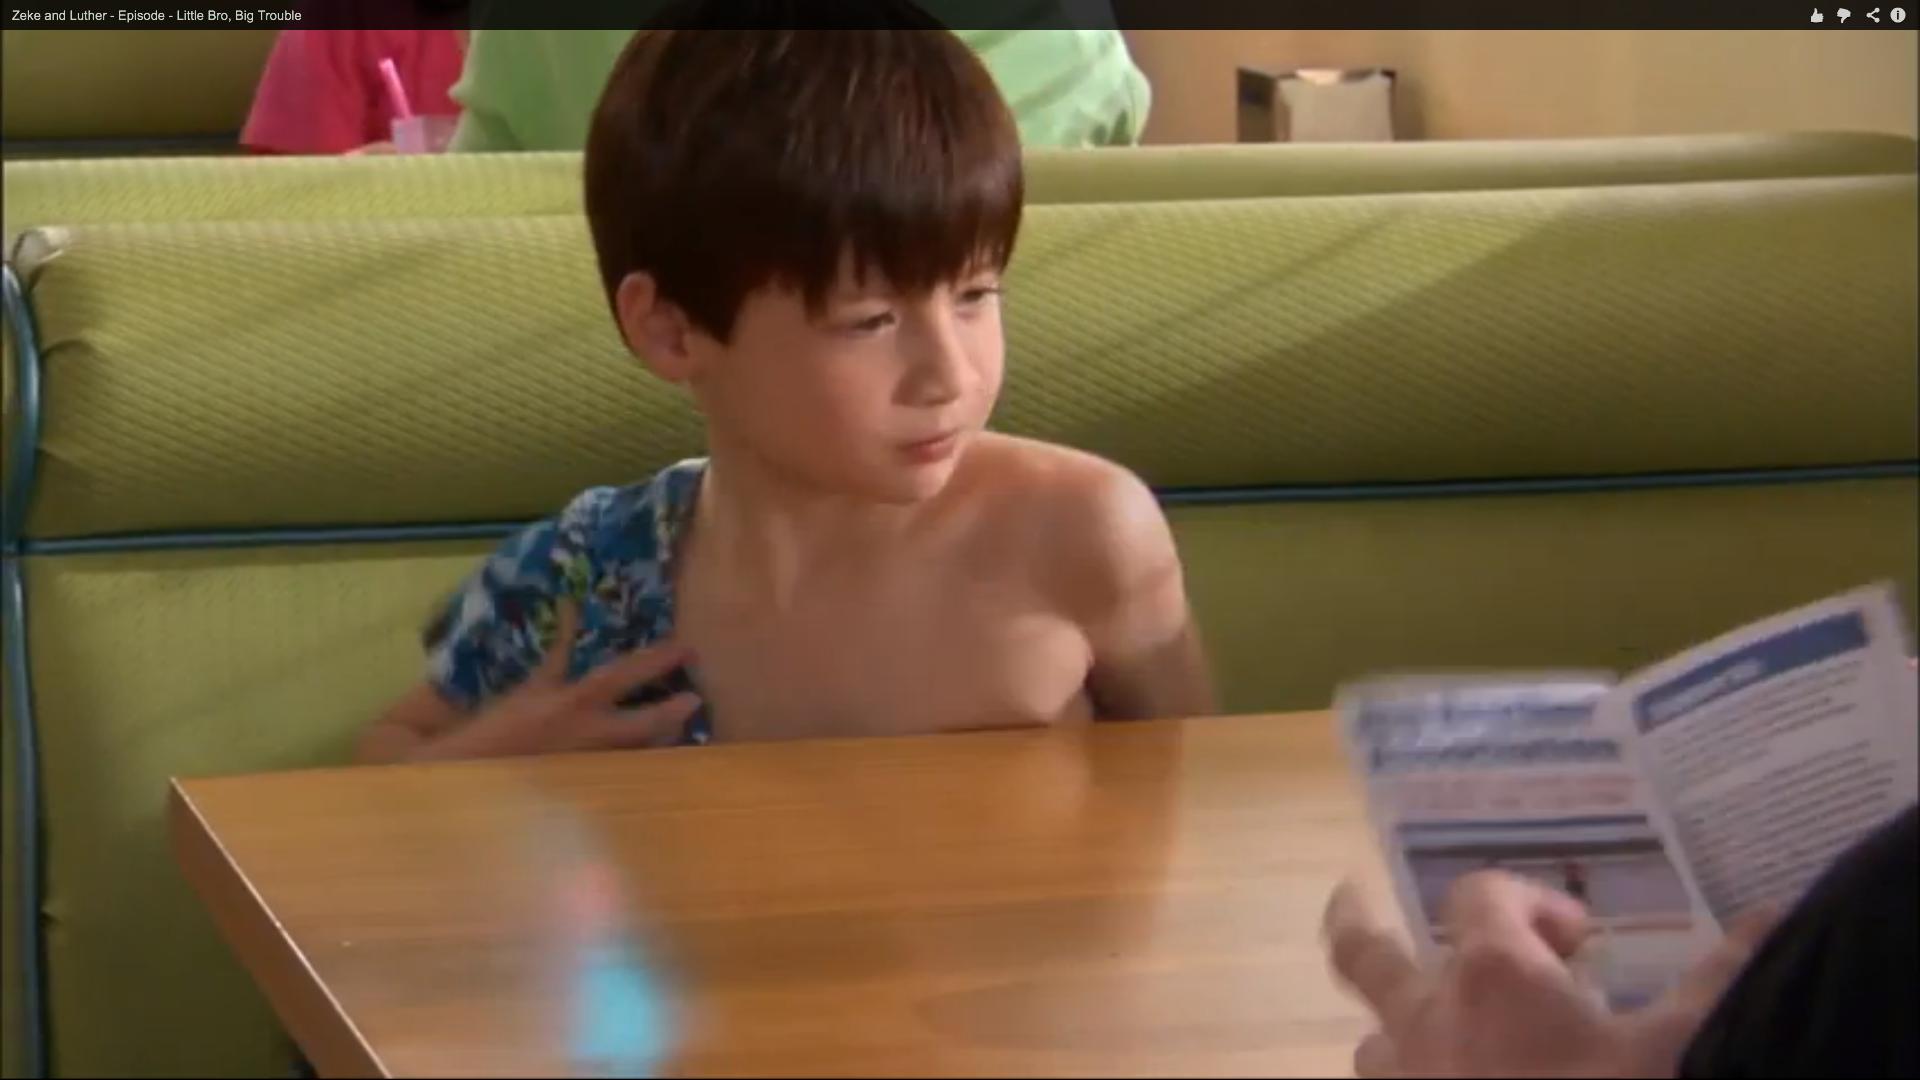 Davis Cleveland in Zeke and Luther